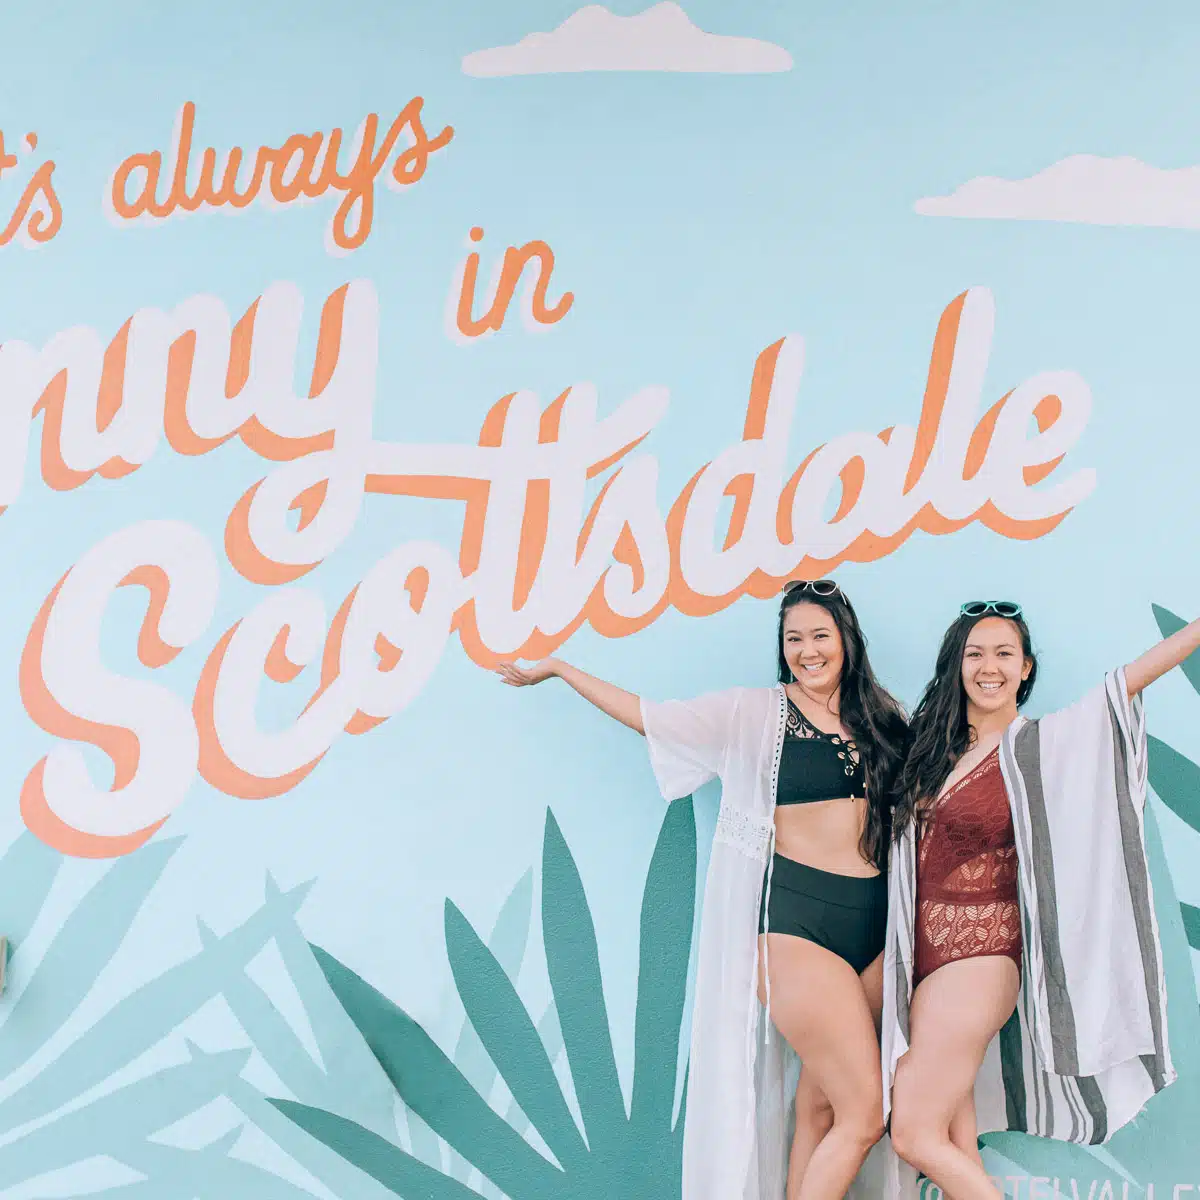 An epic Scottsdale girls' trip itinerary, by travel blogger What The Fab